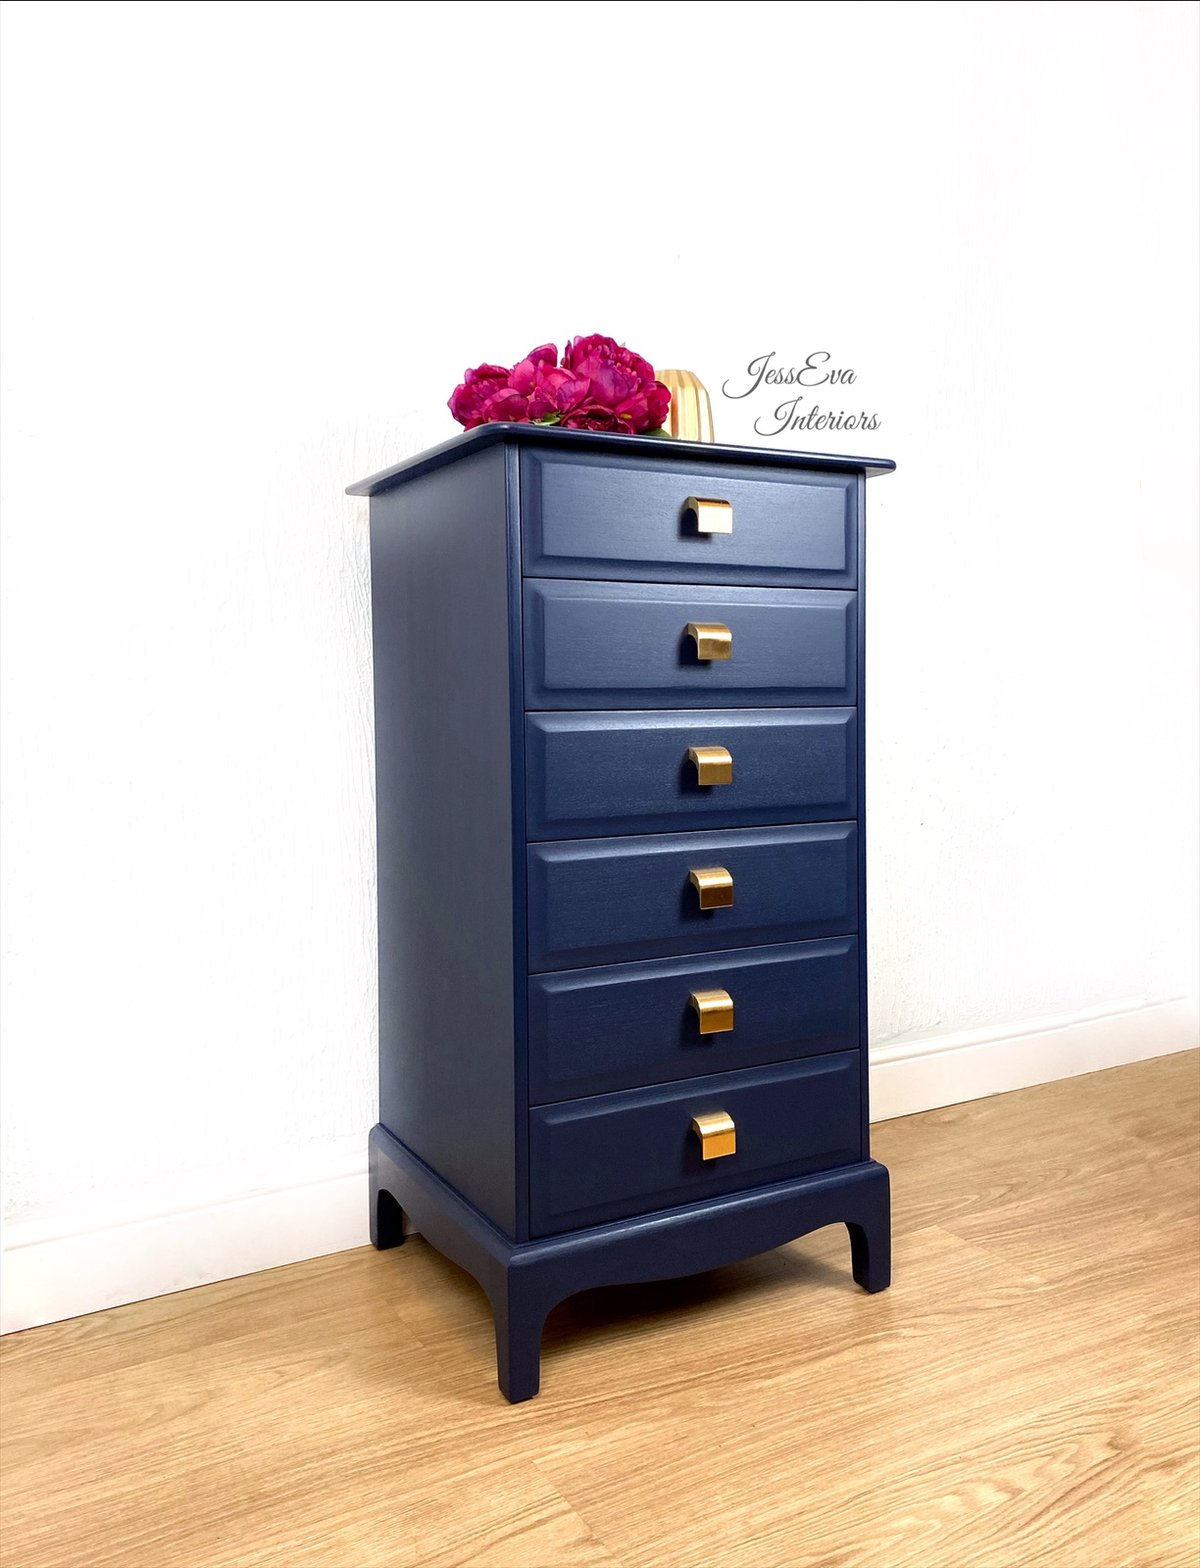 Stag Minstrel Tallboy / Chest of Drawers painted in navy blue with gold handles 